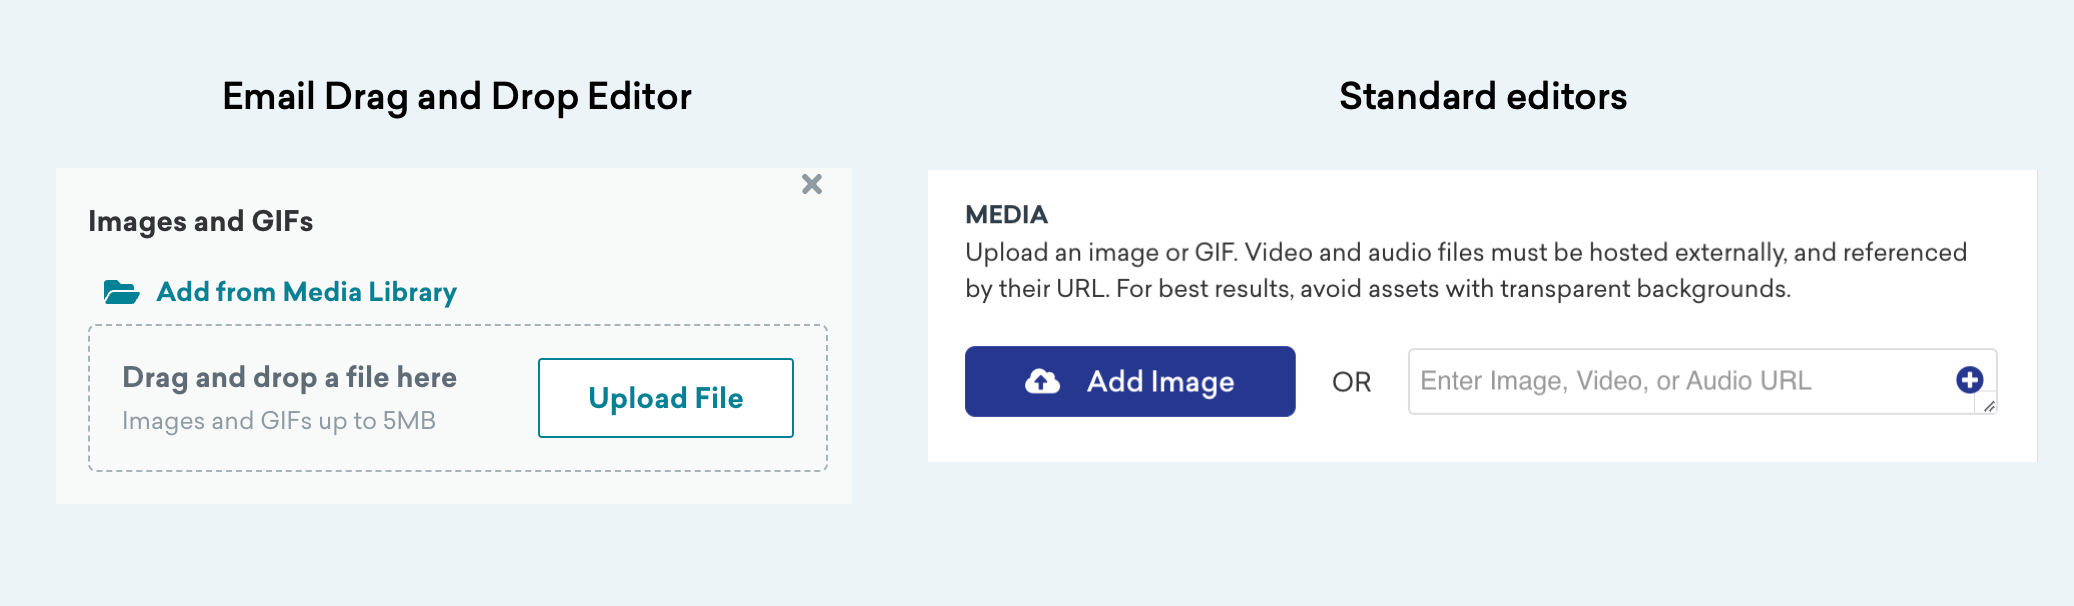 Two common ways of accessing the Media Library depending on the message composer. One shows the email Drag and Drop Editor with the title "Images and GIFs" and a button to "Add from Media Library". The other shows the standard editors, such as push and in-app messages, with the title "Media" and a button to "Add Image".